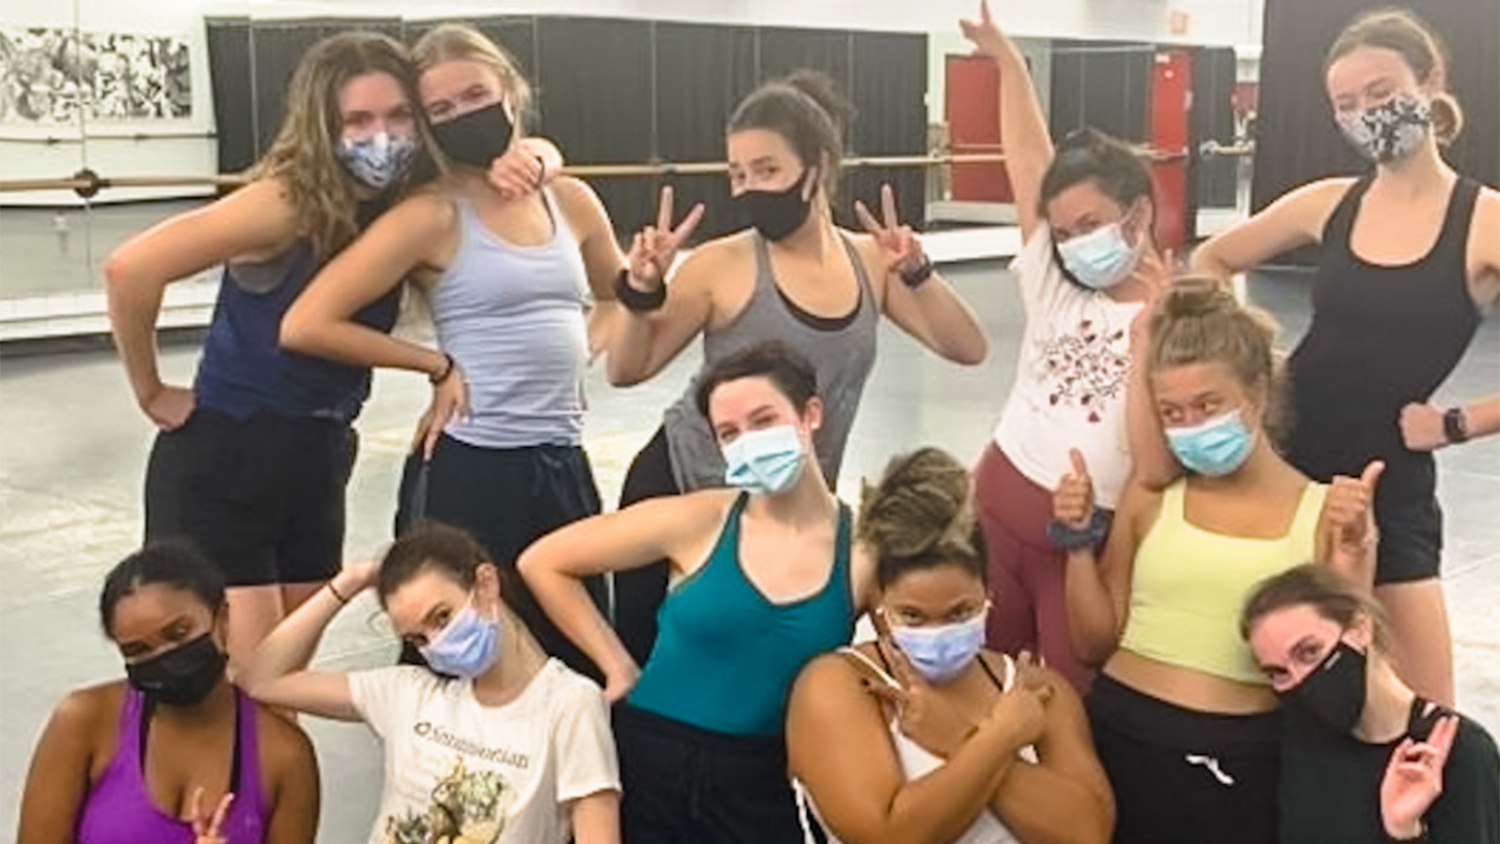 A group of dance students pose and make wolfie signs during the residency weekend